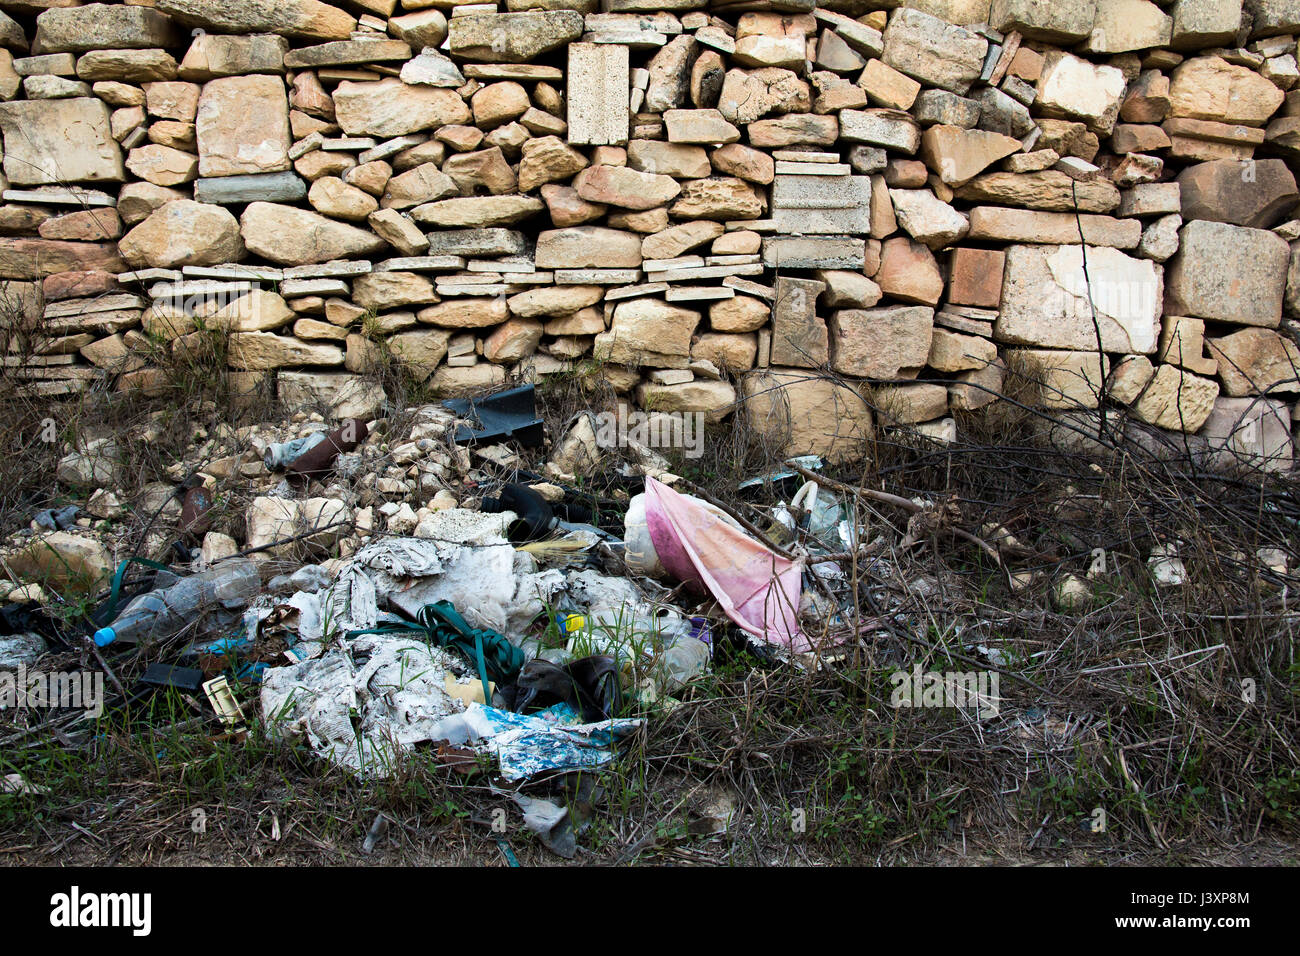 Rubbish dumped by the side of the road in the Maltese countryside. Stock Photo